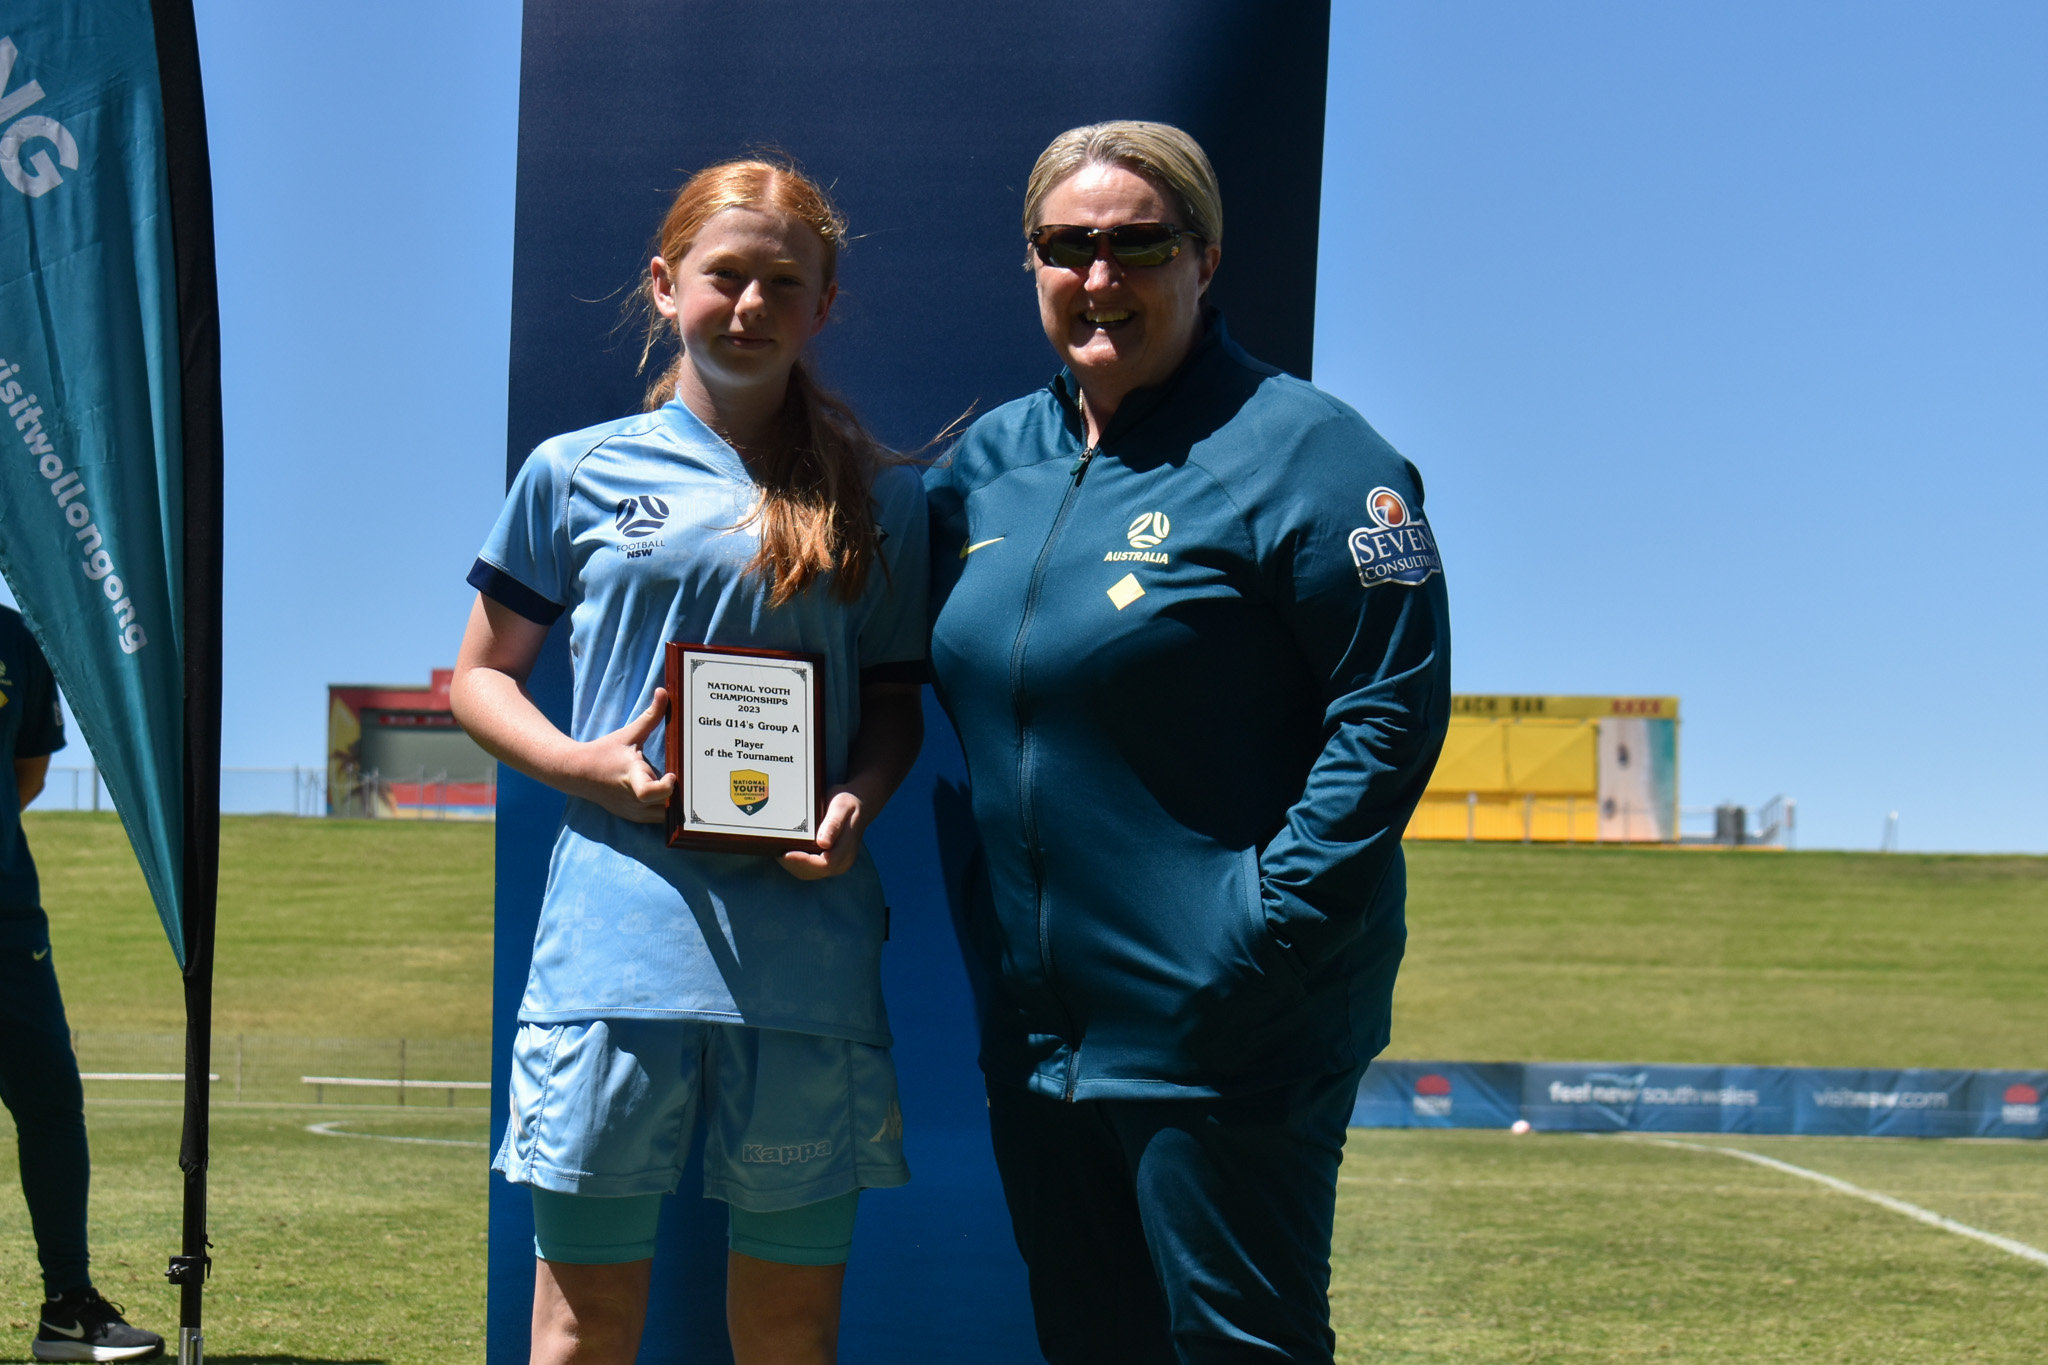 Clare Corbett from Football NSW was awarded the Under 14A Player of the Tournament for her outstanding performance.